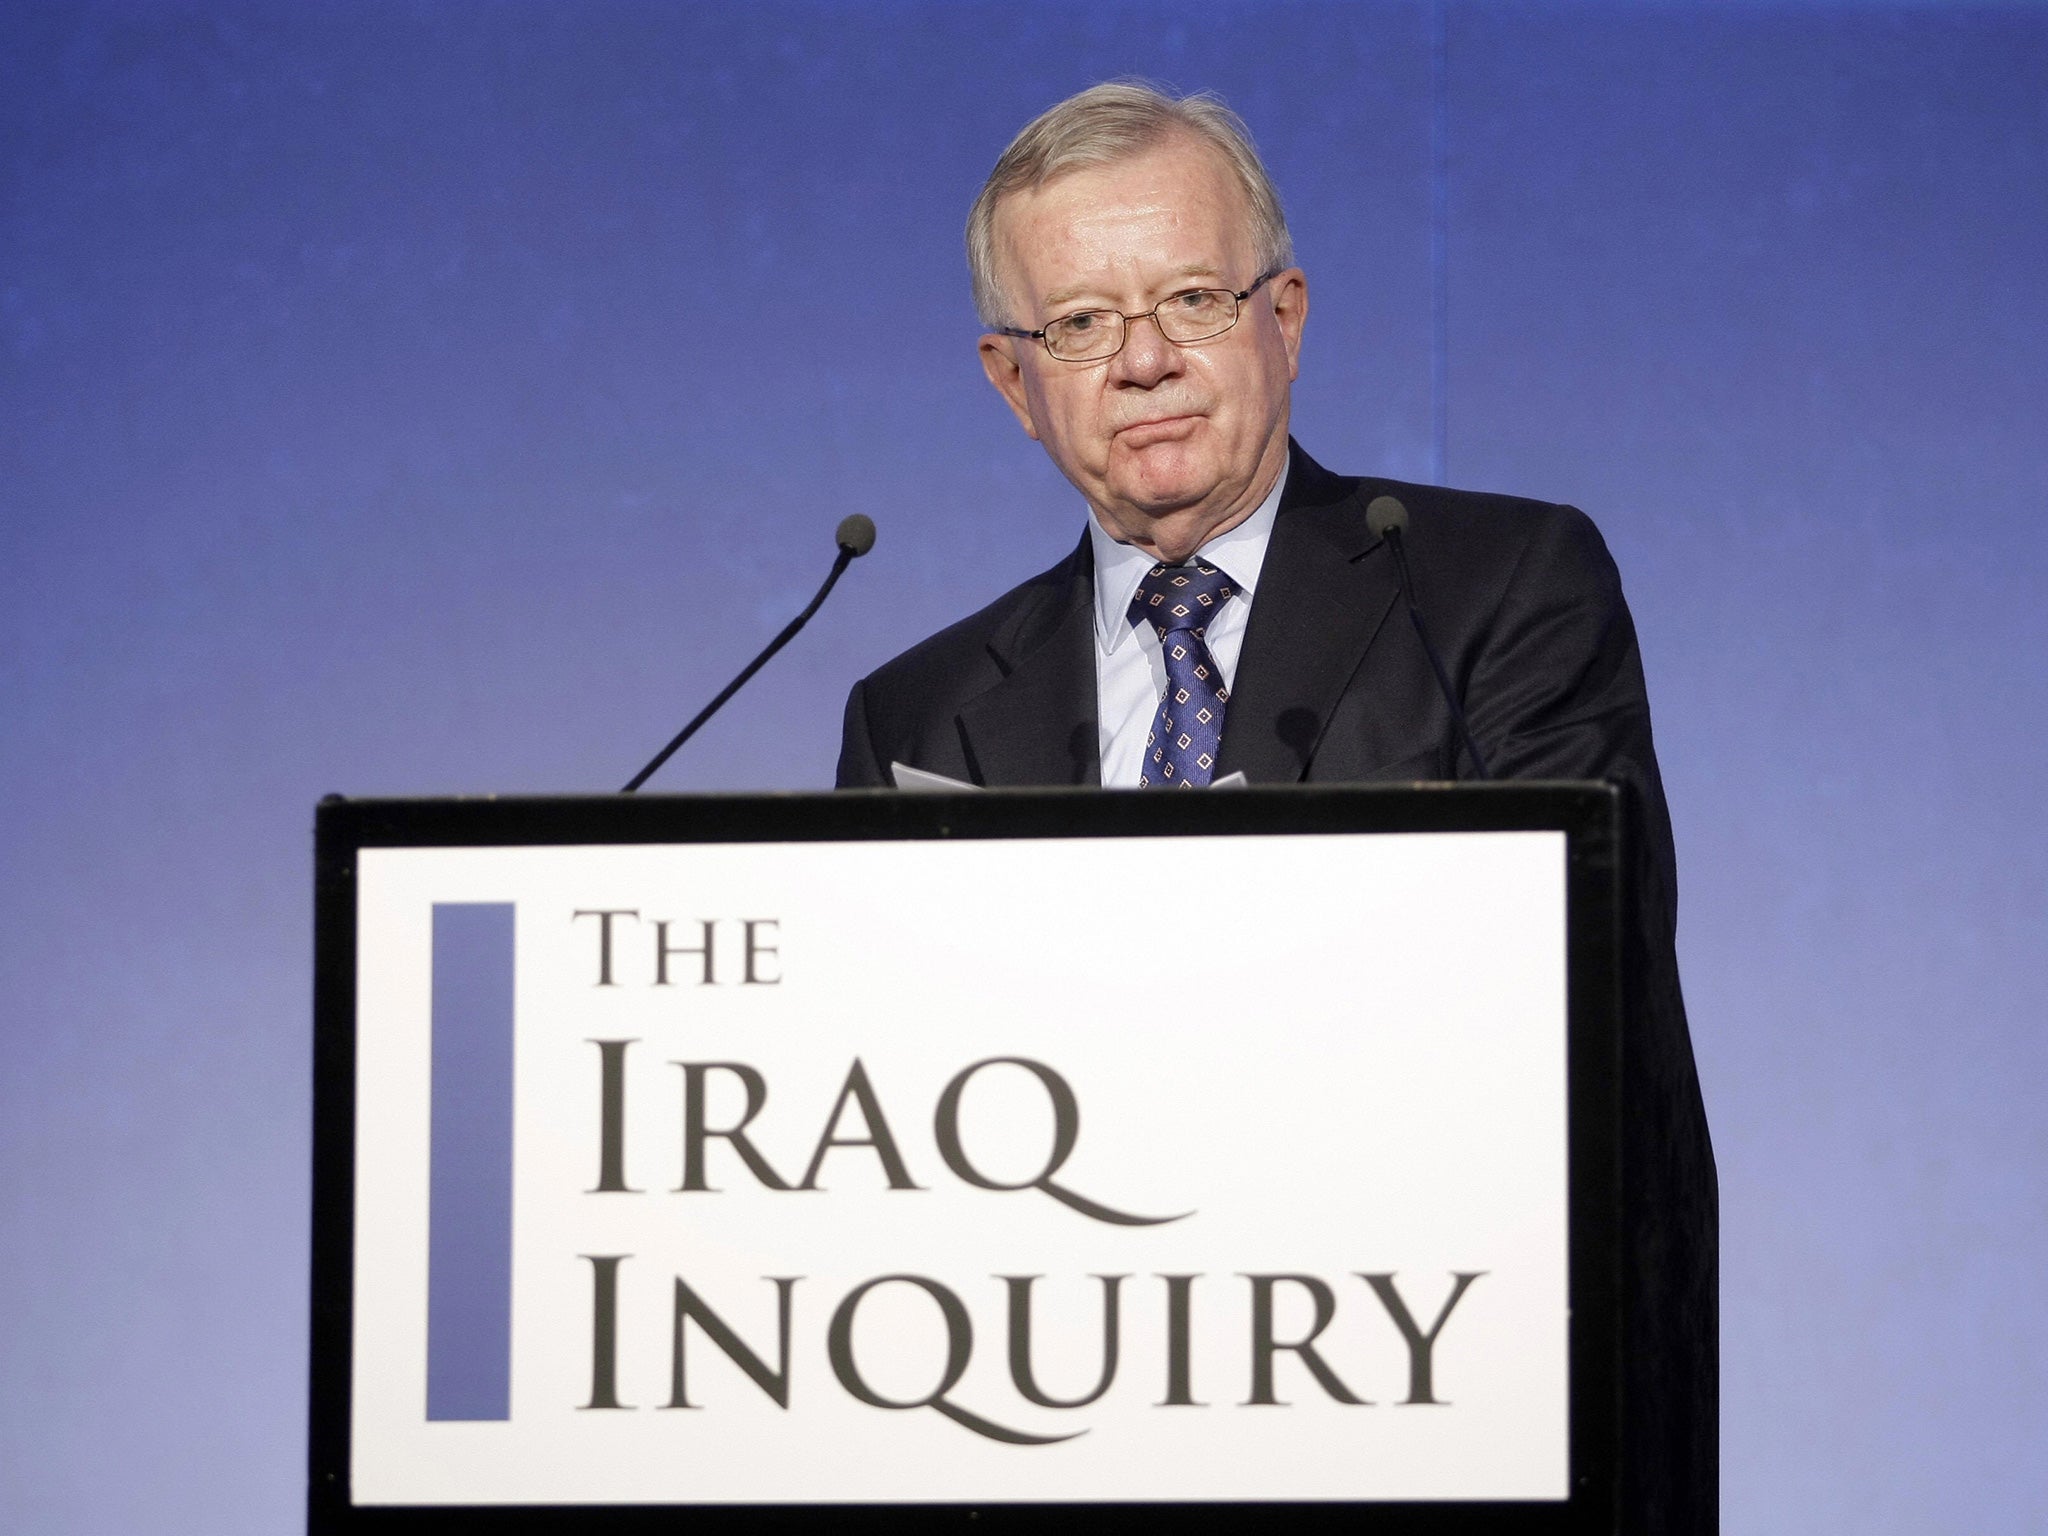 Sir John Chilcot has said he expects the report to be out this summer